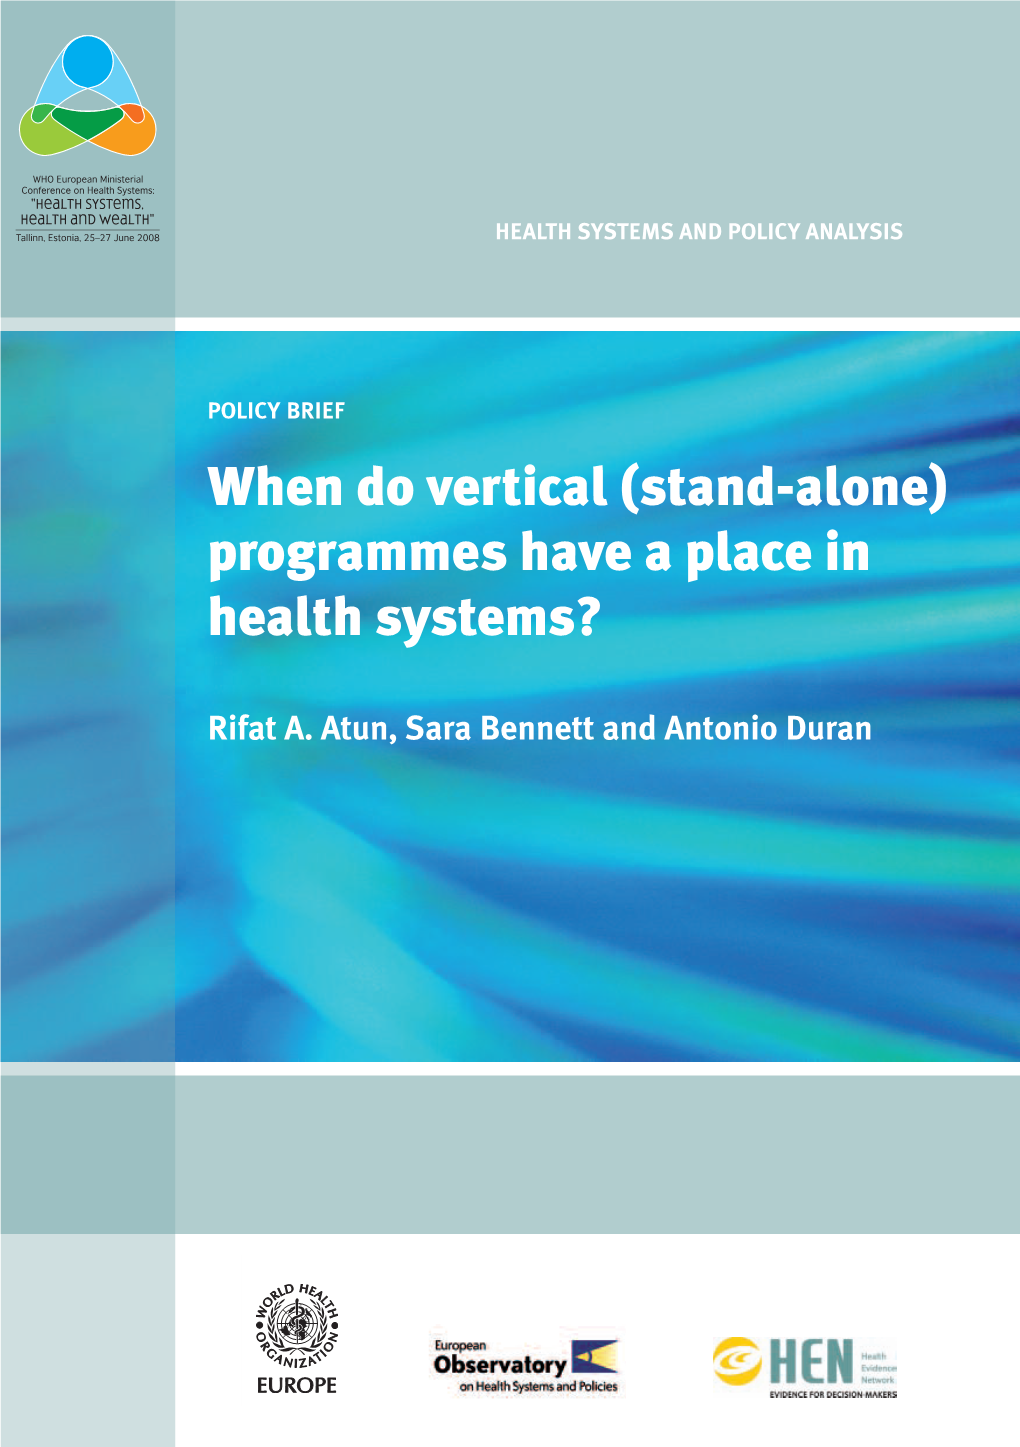 When Do Vertical (Stand-Alone) Programmes Have a Place in Health Systems?